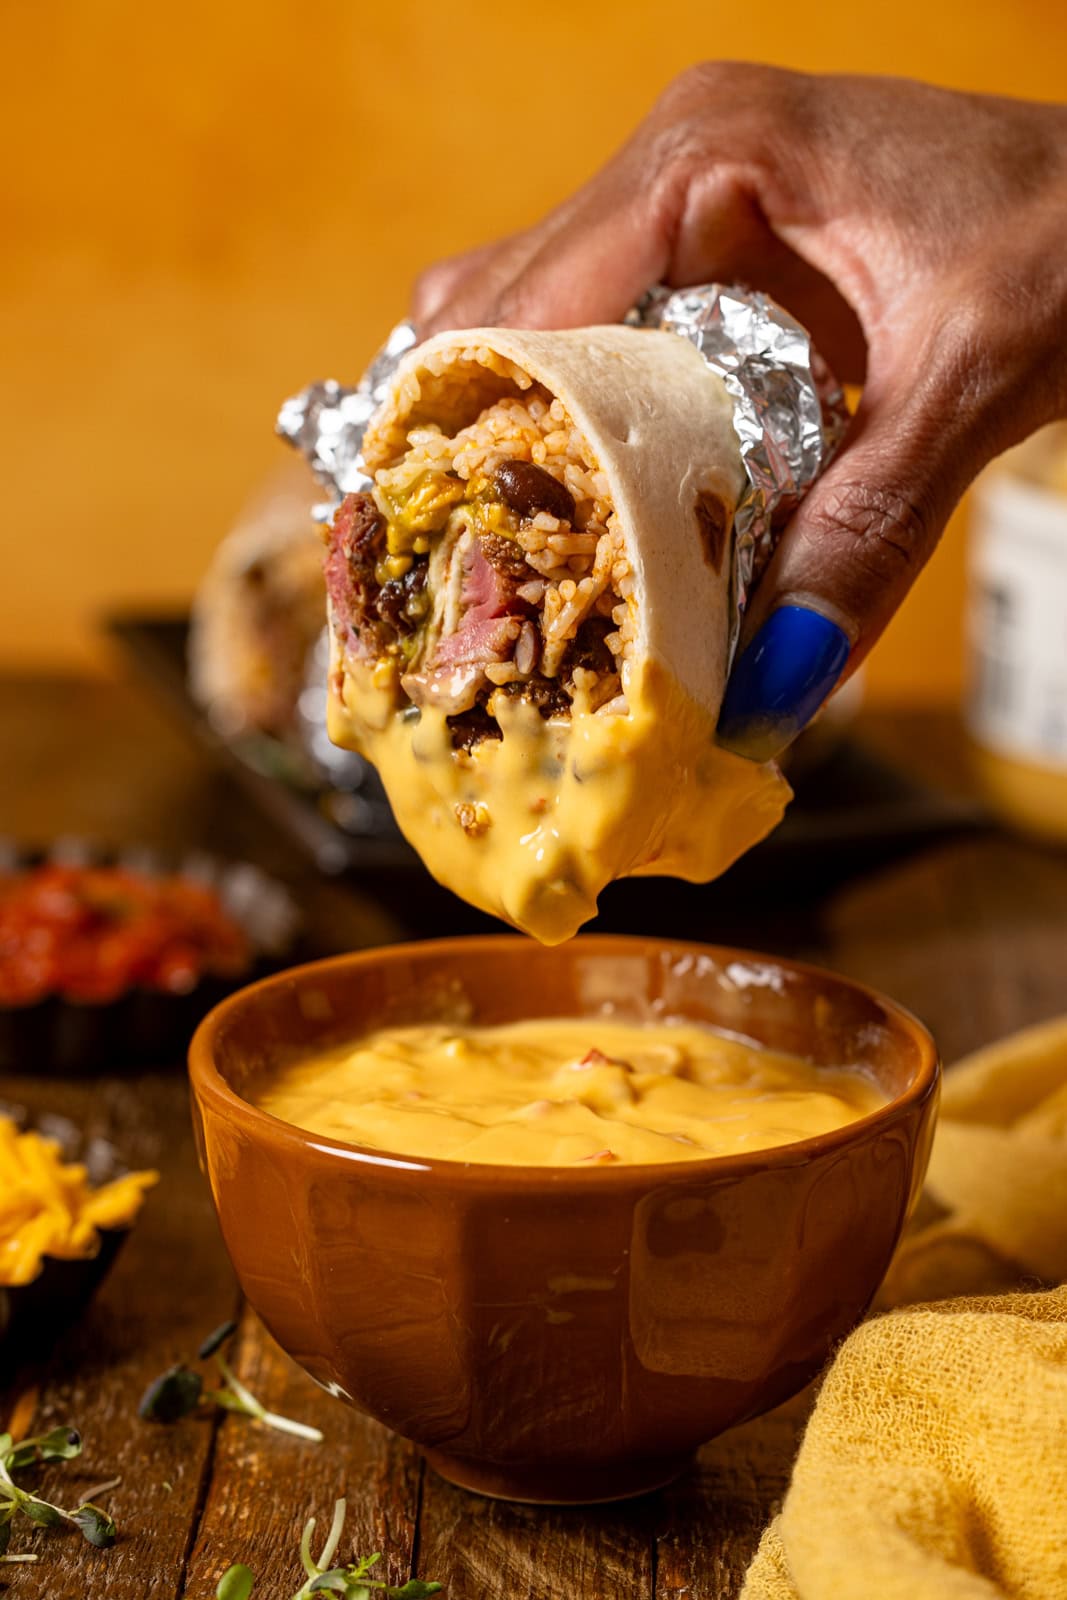 Burrito being held and dipped in a sauce. 